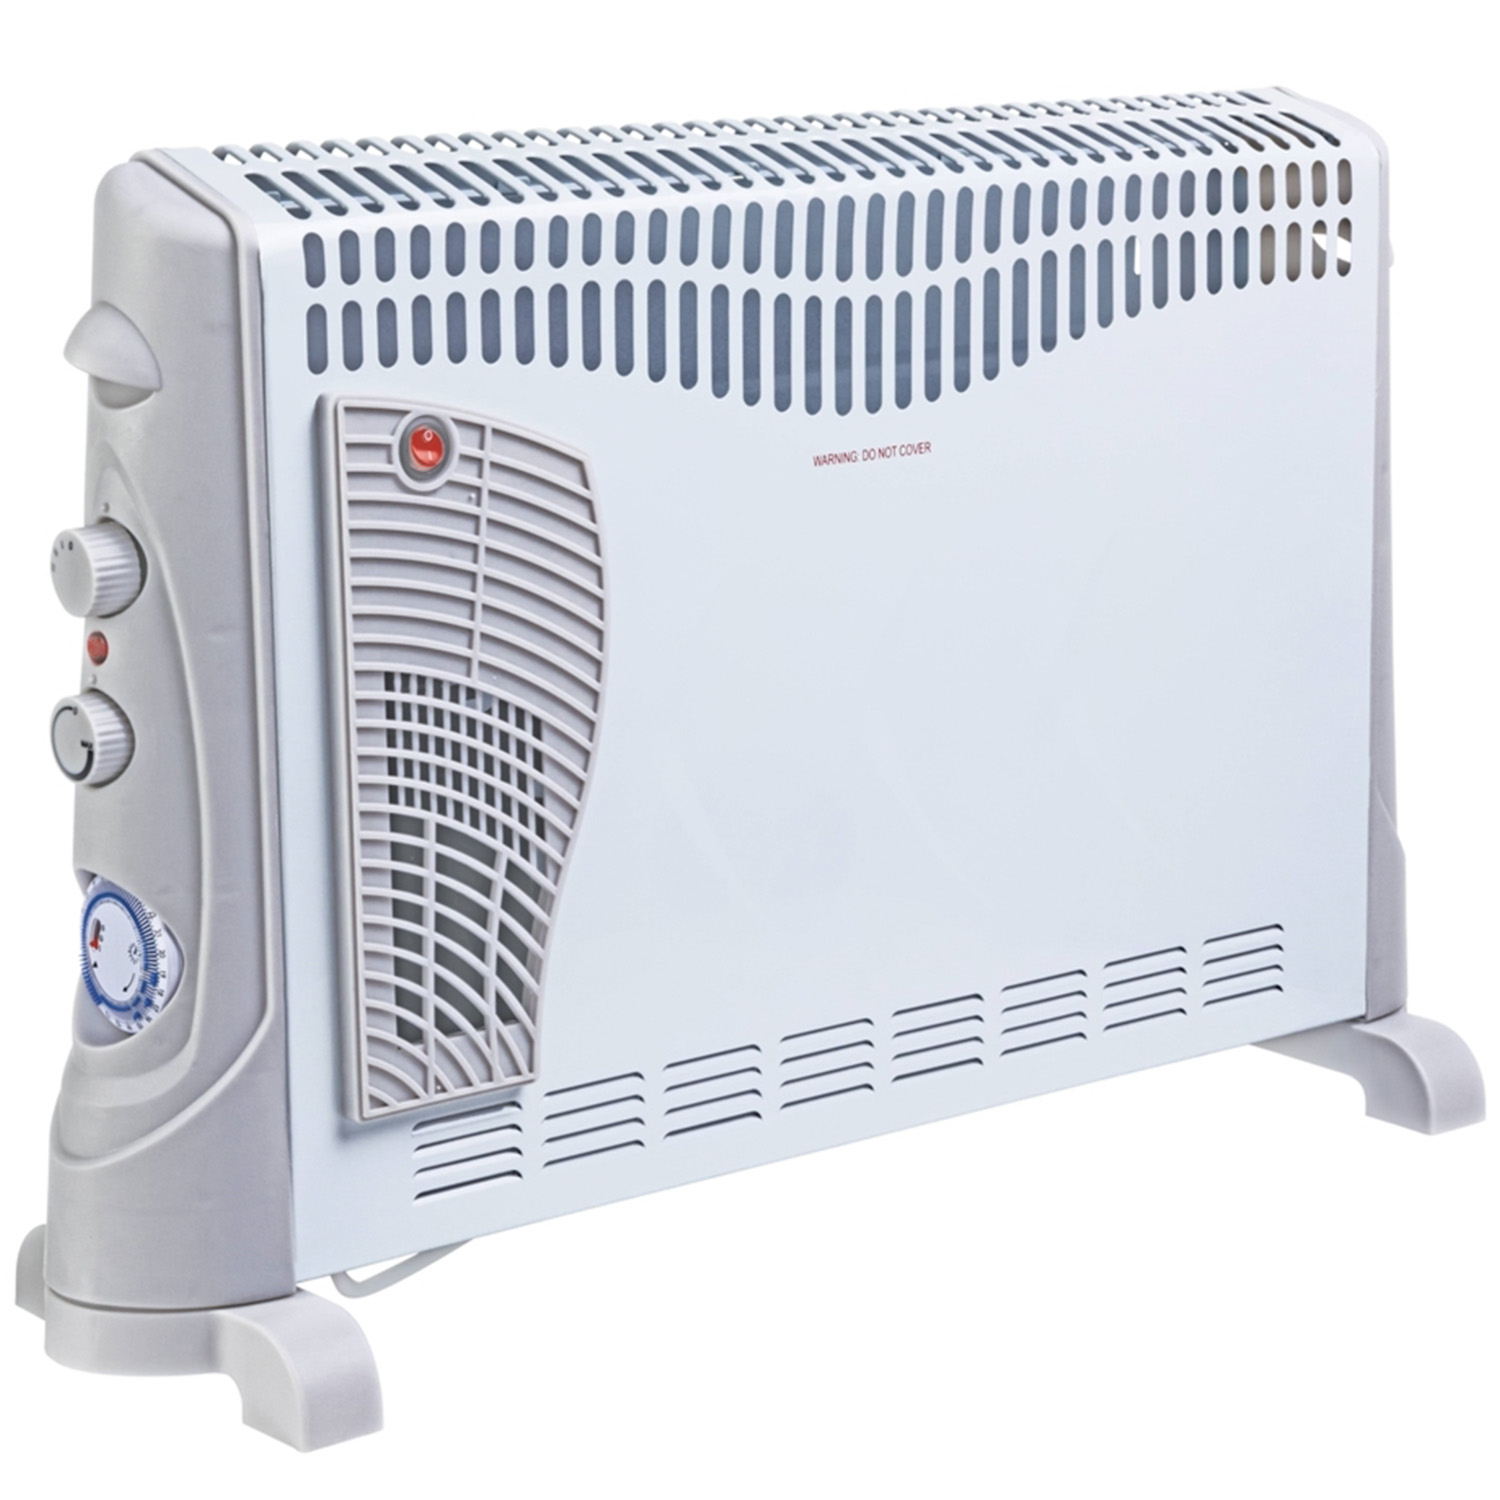 Convector Heater With Turbo and Timer Image 1